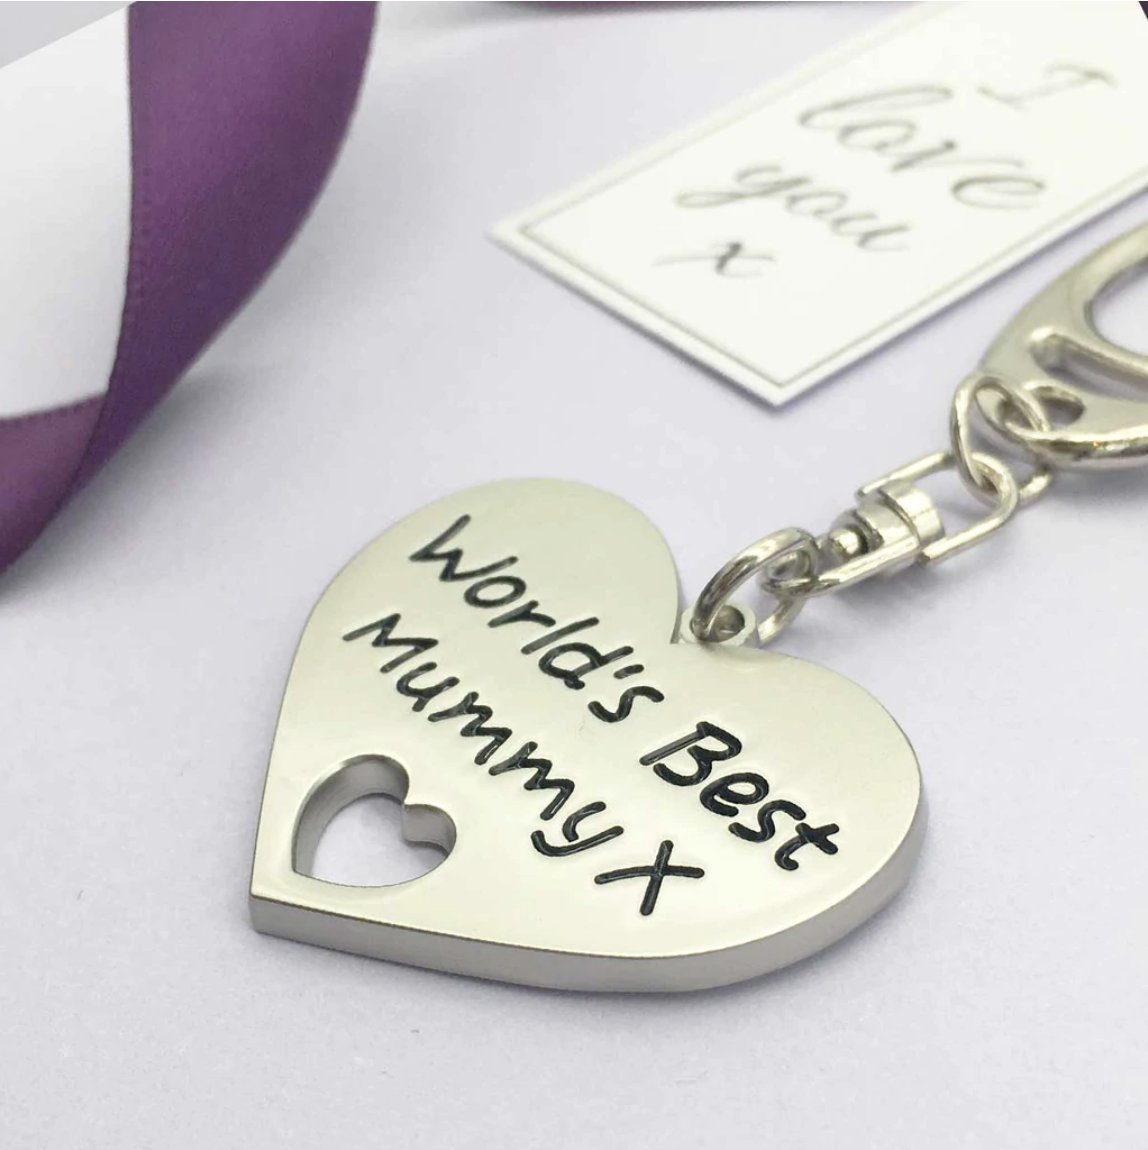 Gifts for Mum from Daughter Son, Birthday Gift for Mum, Bonus Acrylic  Engraved Plaque Sign, Personalised Gifts Mum, Best Mum in the World for Mum,  Thanksgiving Gift Mum : Amazon.de: Home &